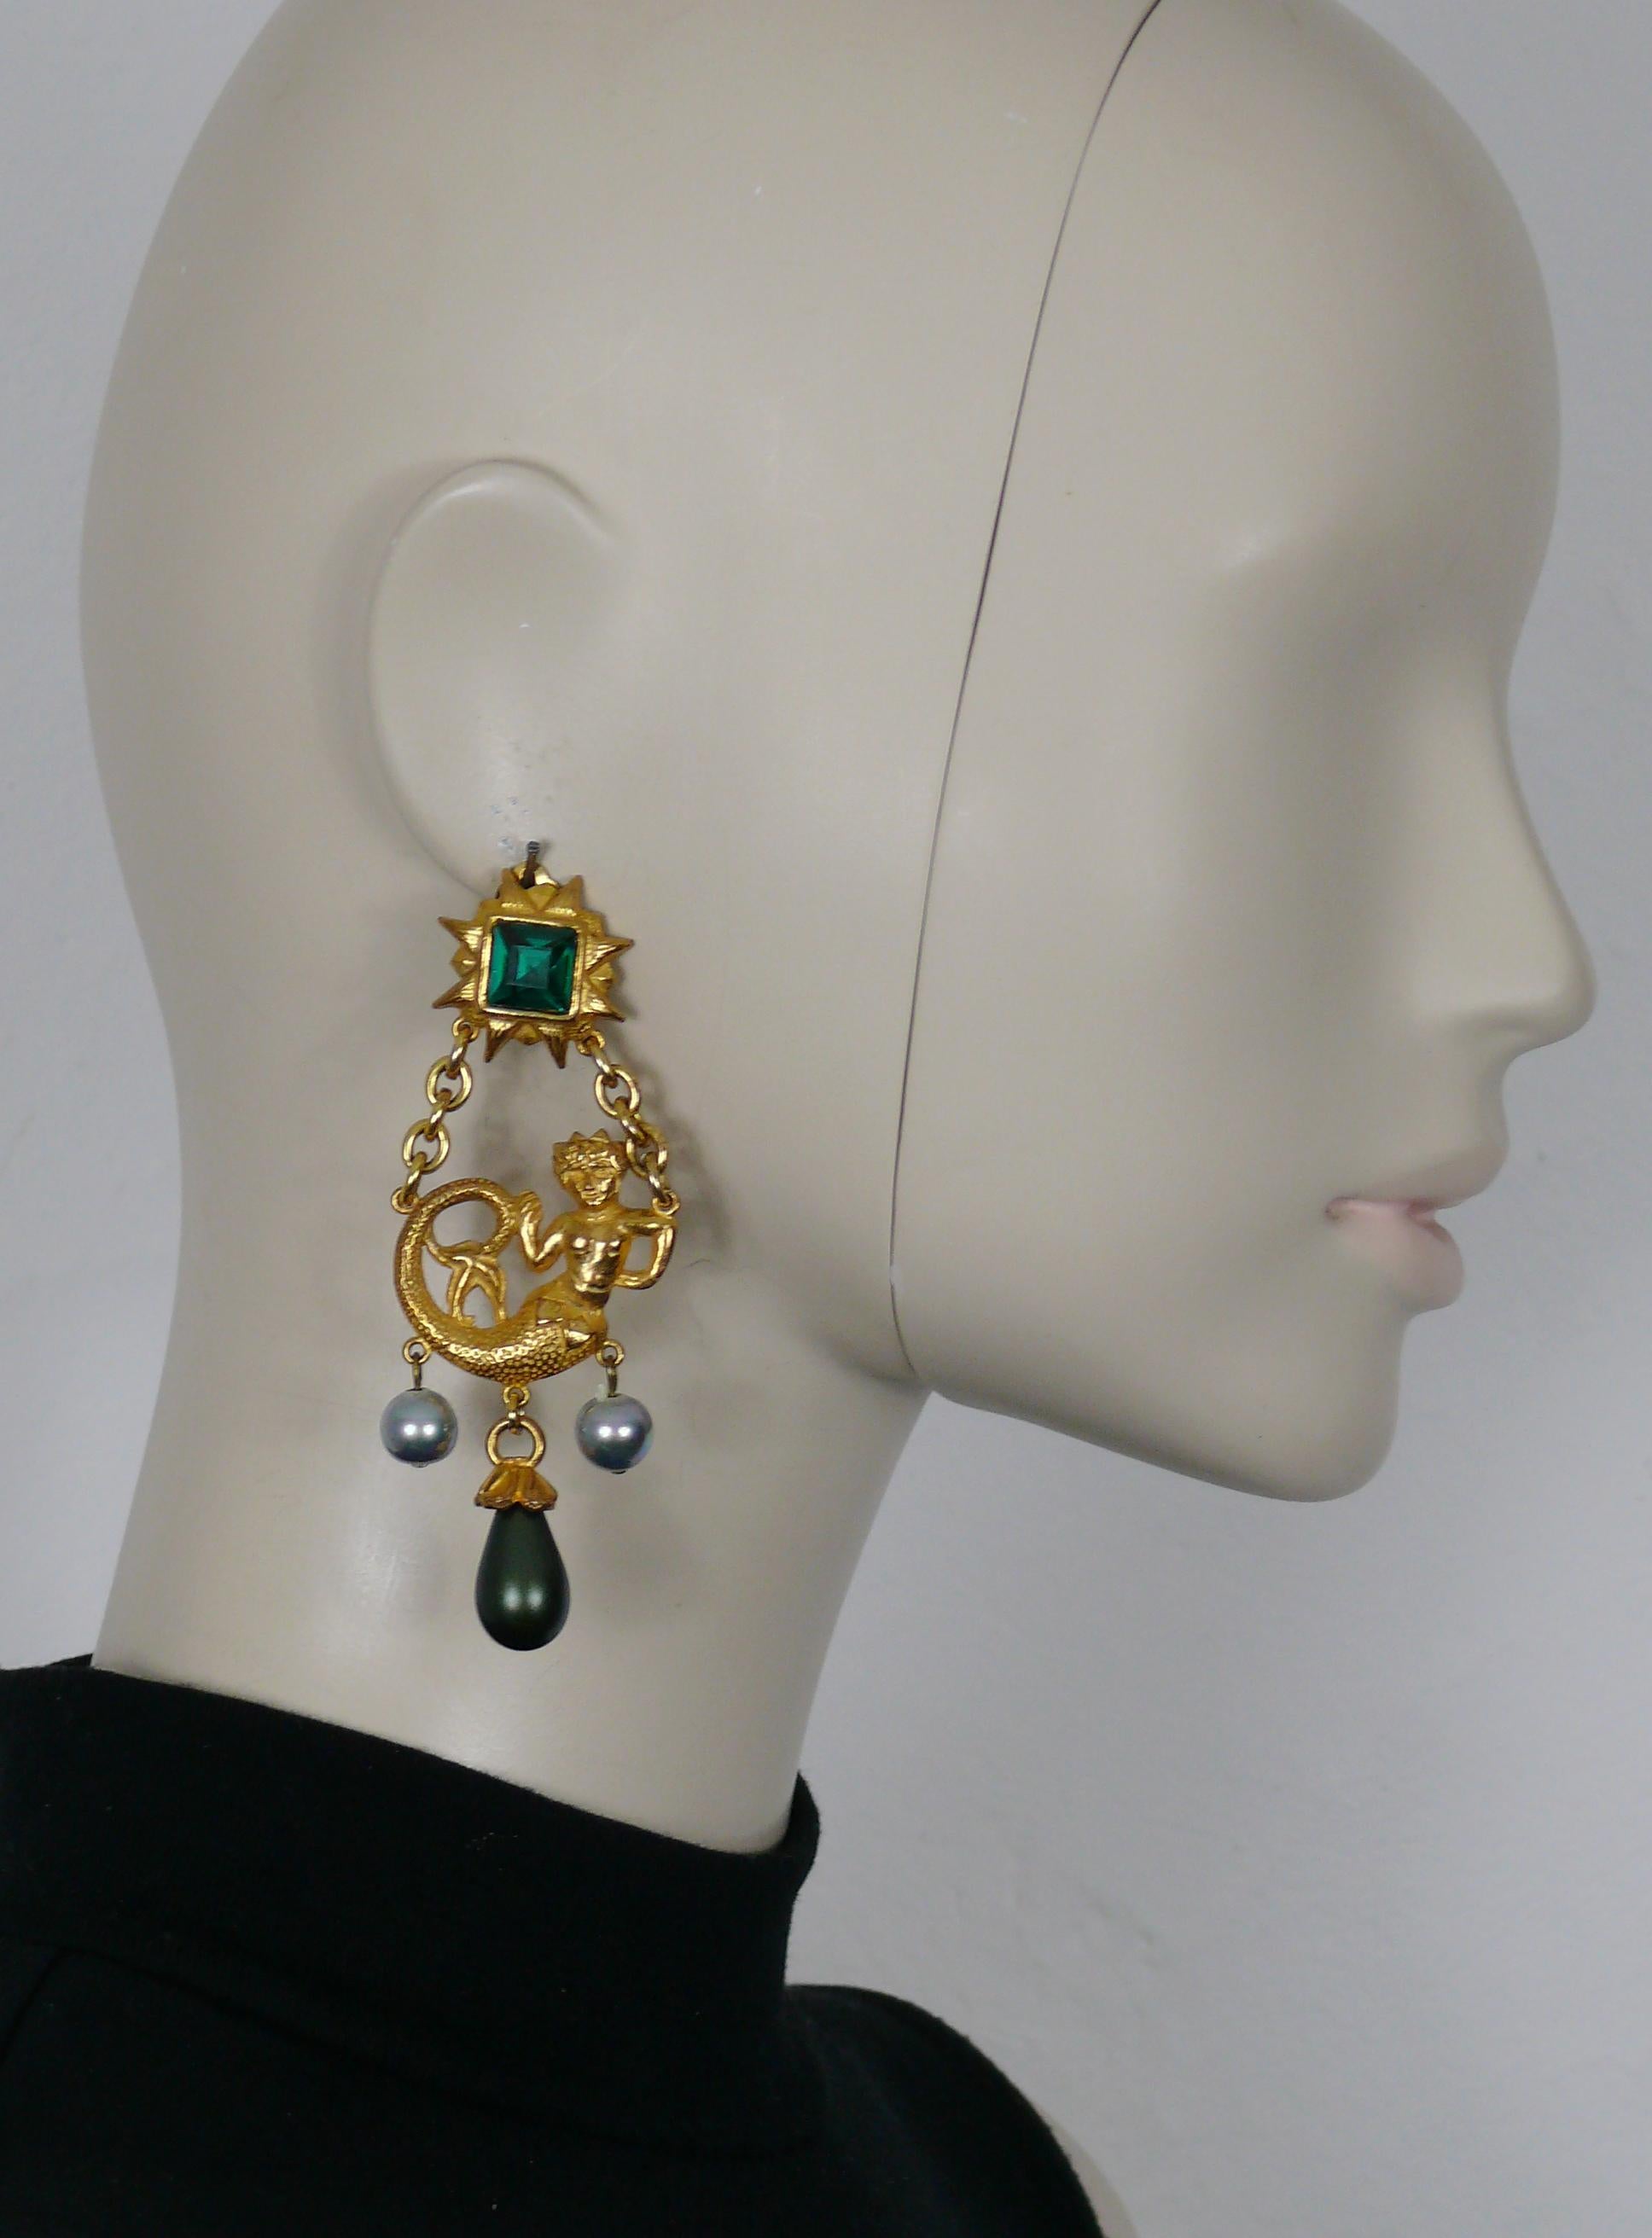 YVES SAINT LAURENT vintage rare gold tone dangling earrings (clip on) featuring a mermaid topped by a radiant sun embellished with a large emerald colour crystal, glass faux pearl (iridescent grey) and drop (matte olive green).

Embossed YSL Made in